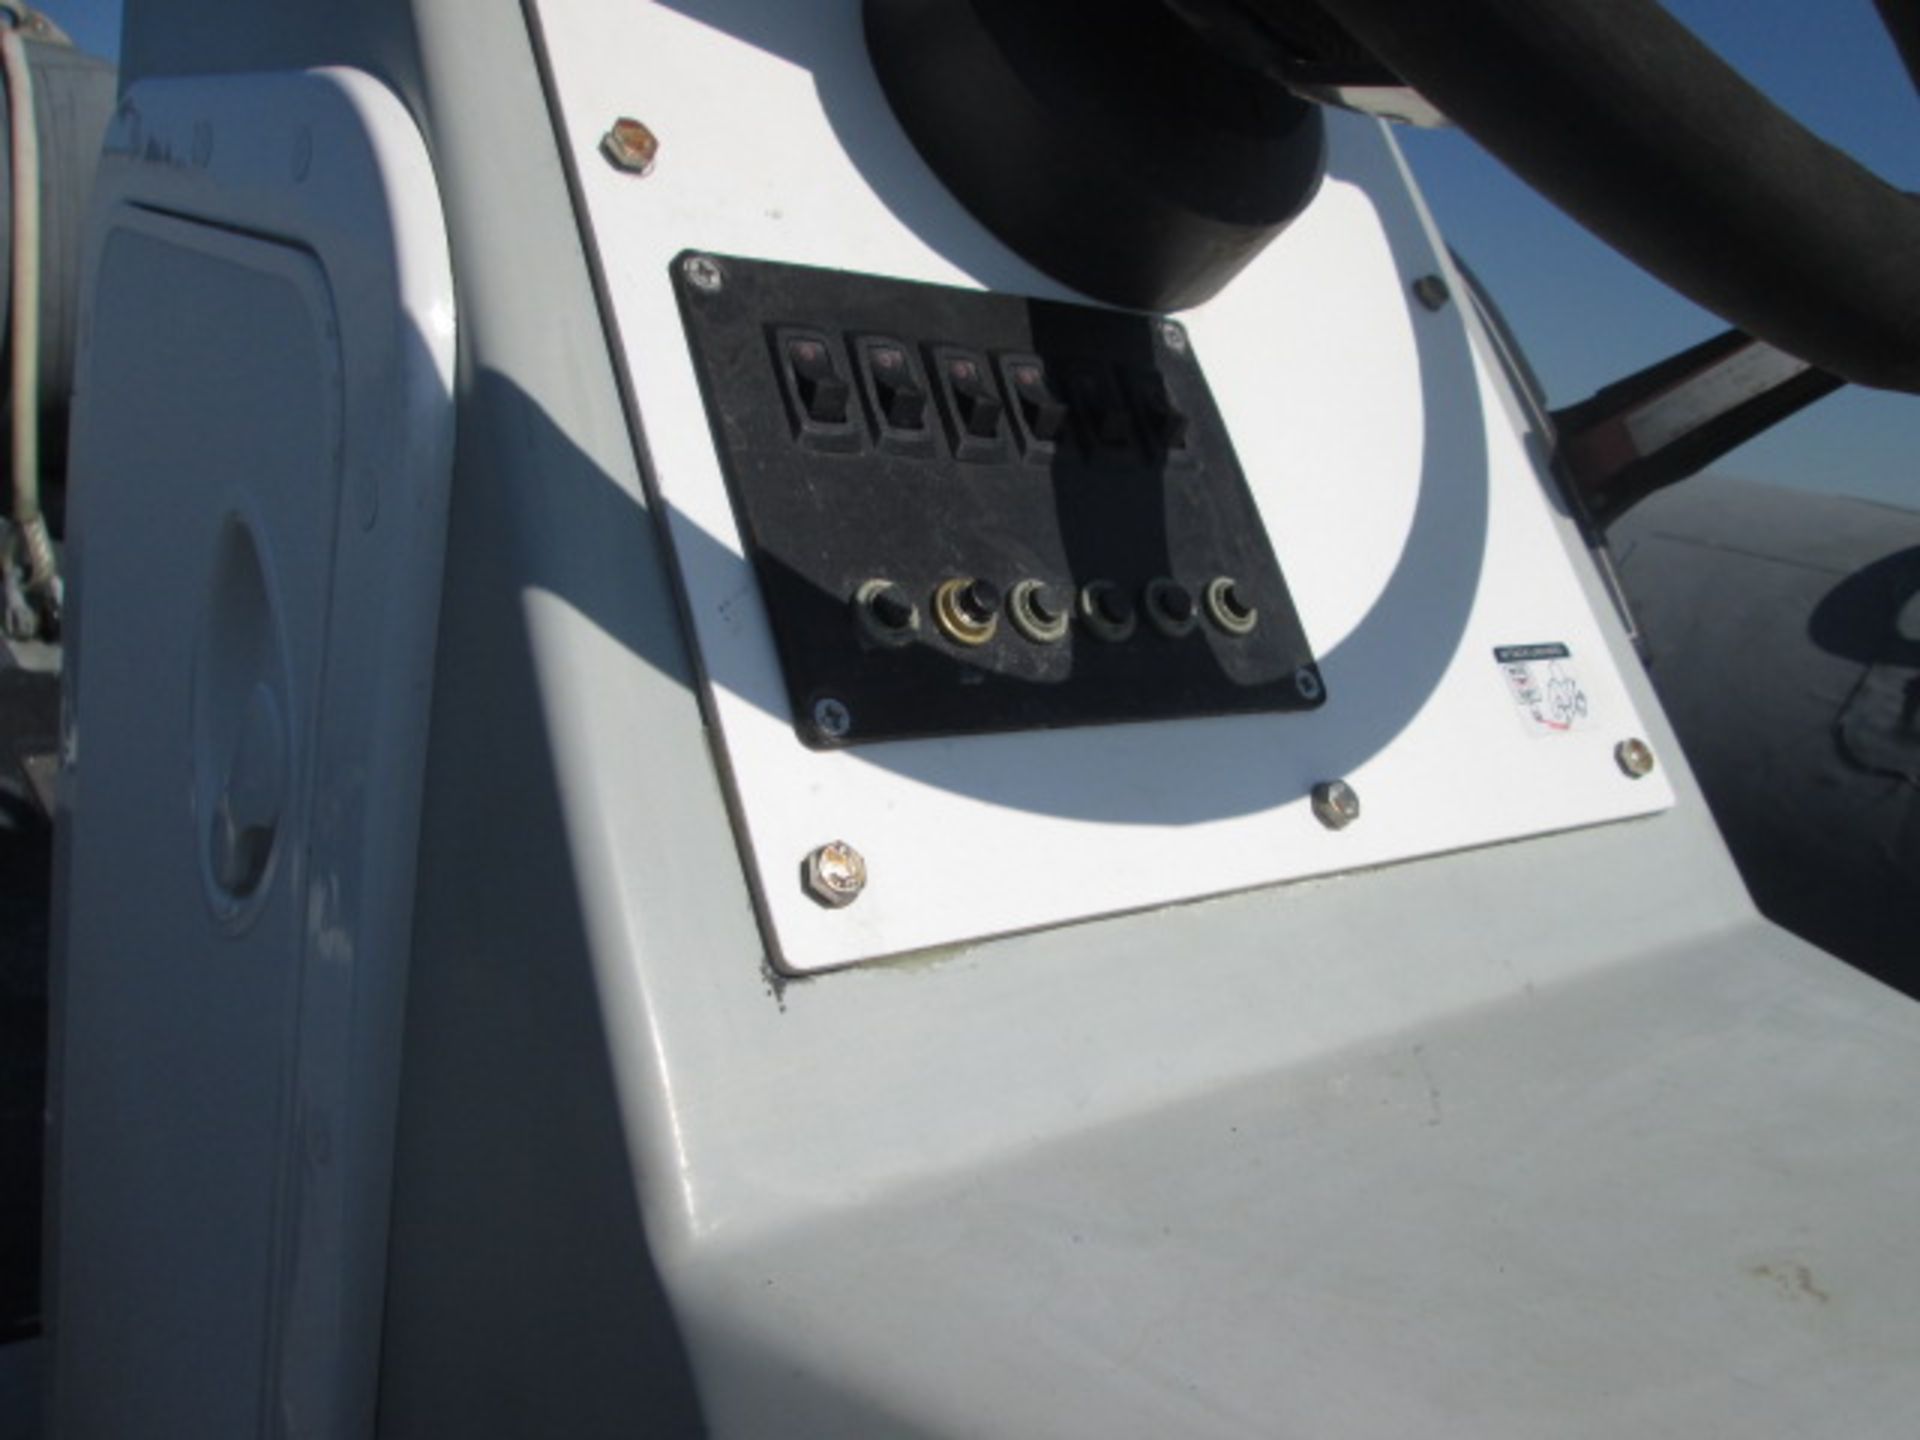 Halmatic 22 Military Spec RIB Boat - Mercury 6 cylinder 2 stroke 150hp outboard - Length 7 - Image 16 of 36